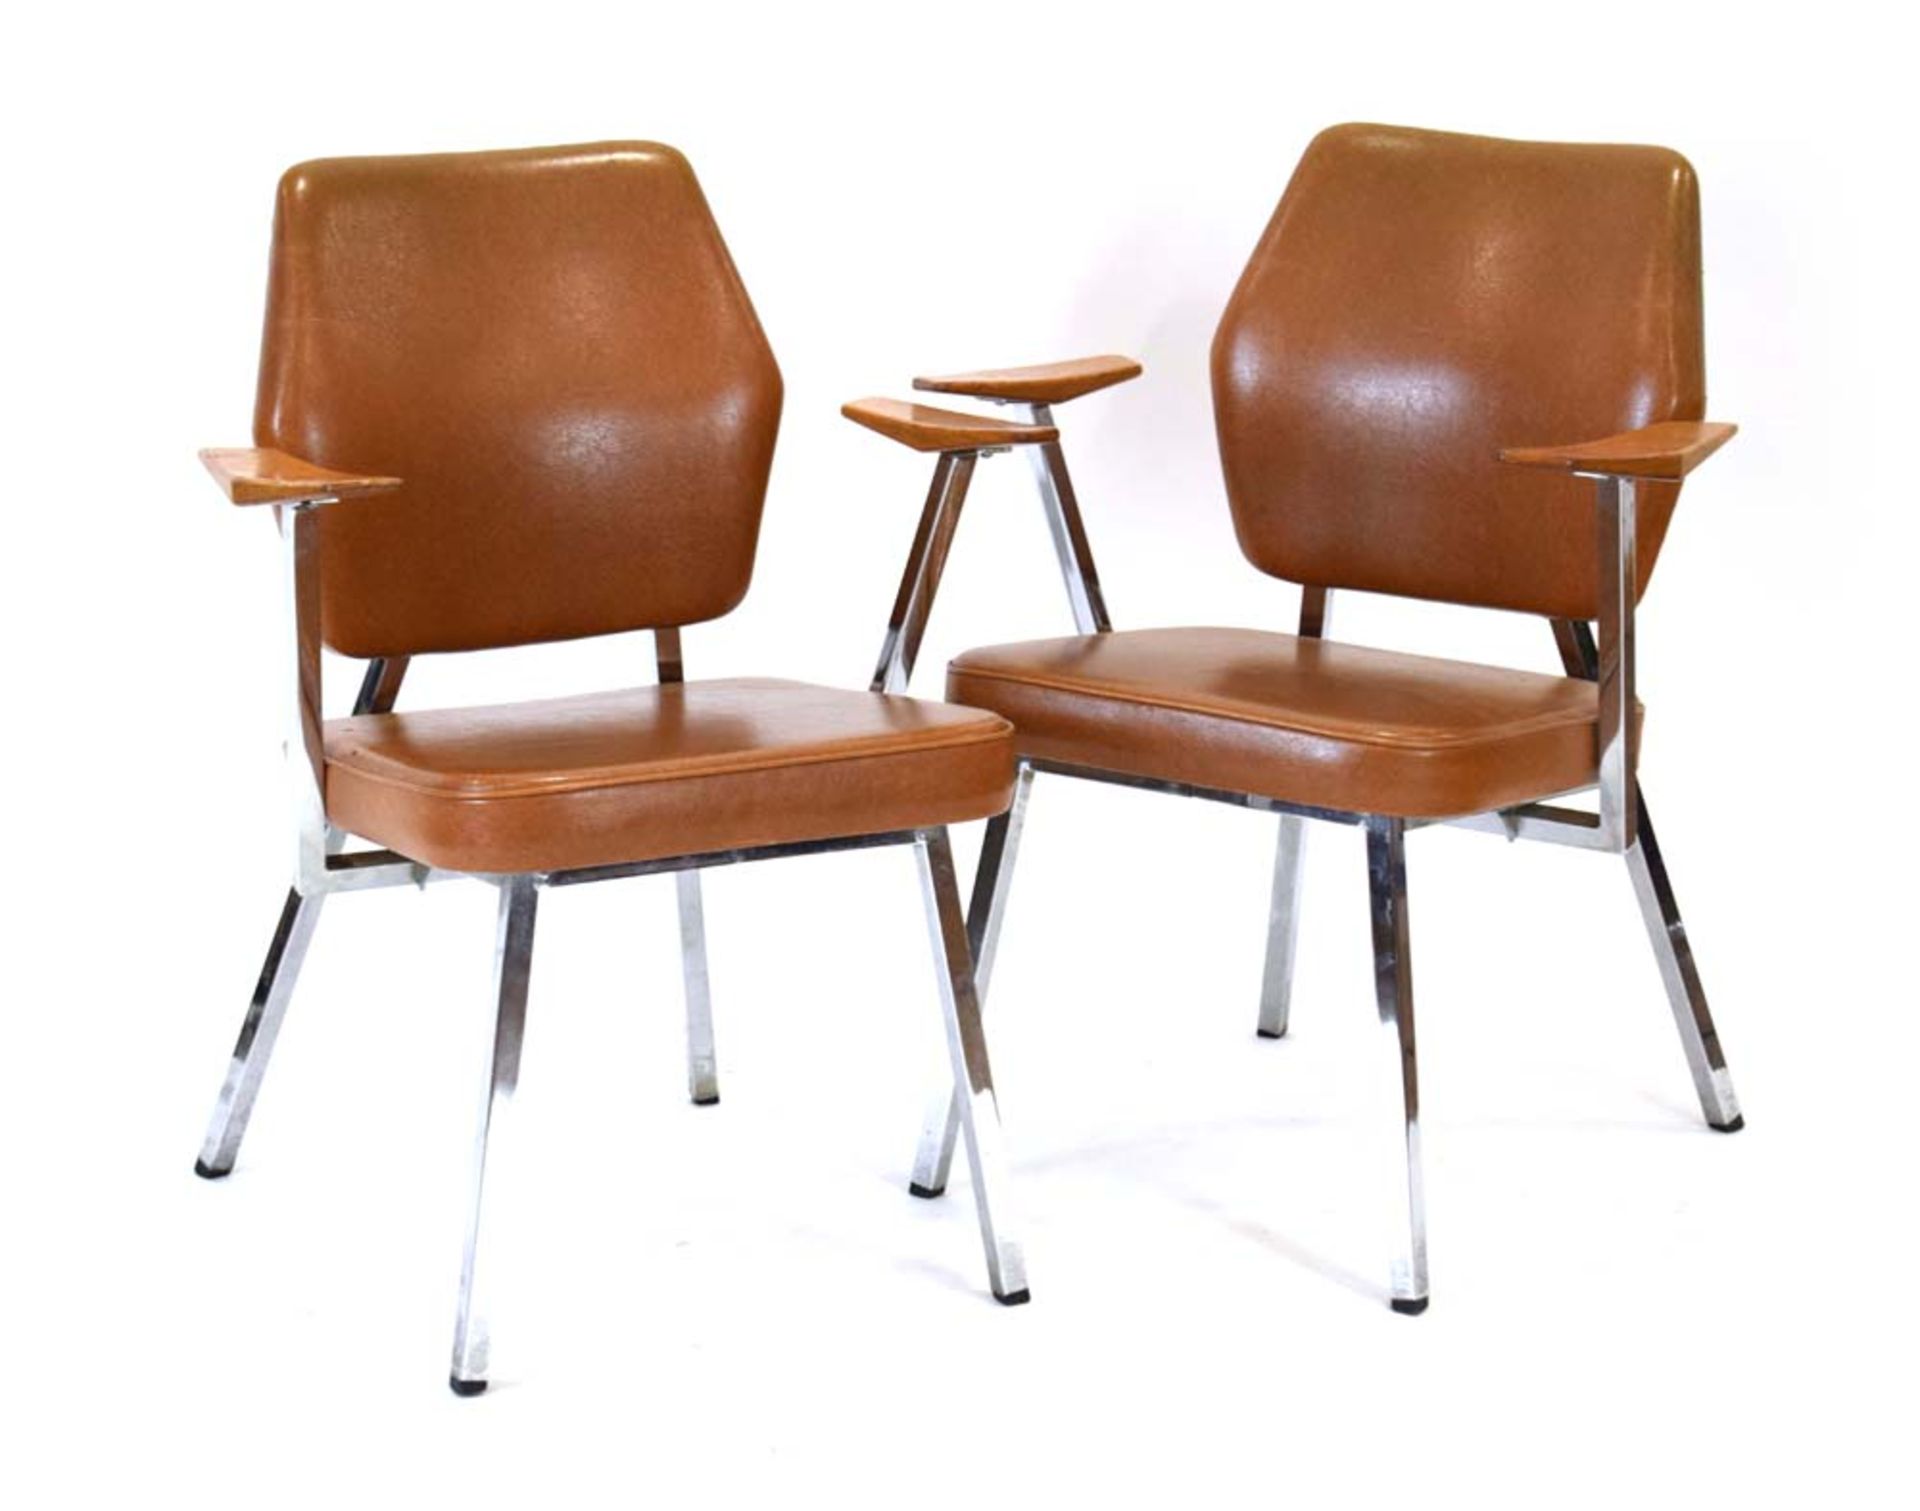 A pair of Swedish armchairs with tan vinyl upholstery, teak angular arms and chromed frames,